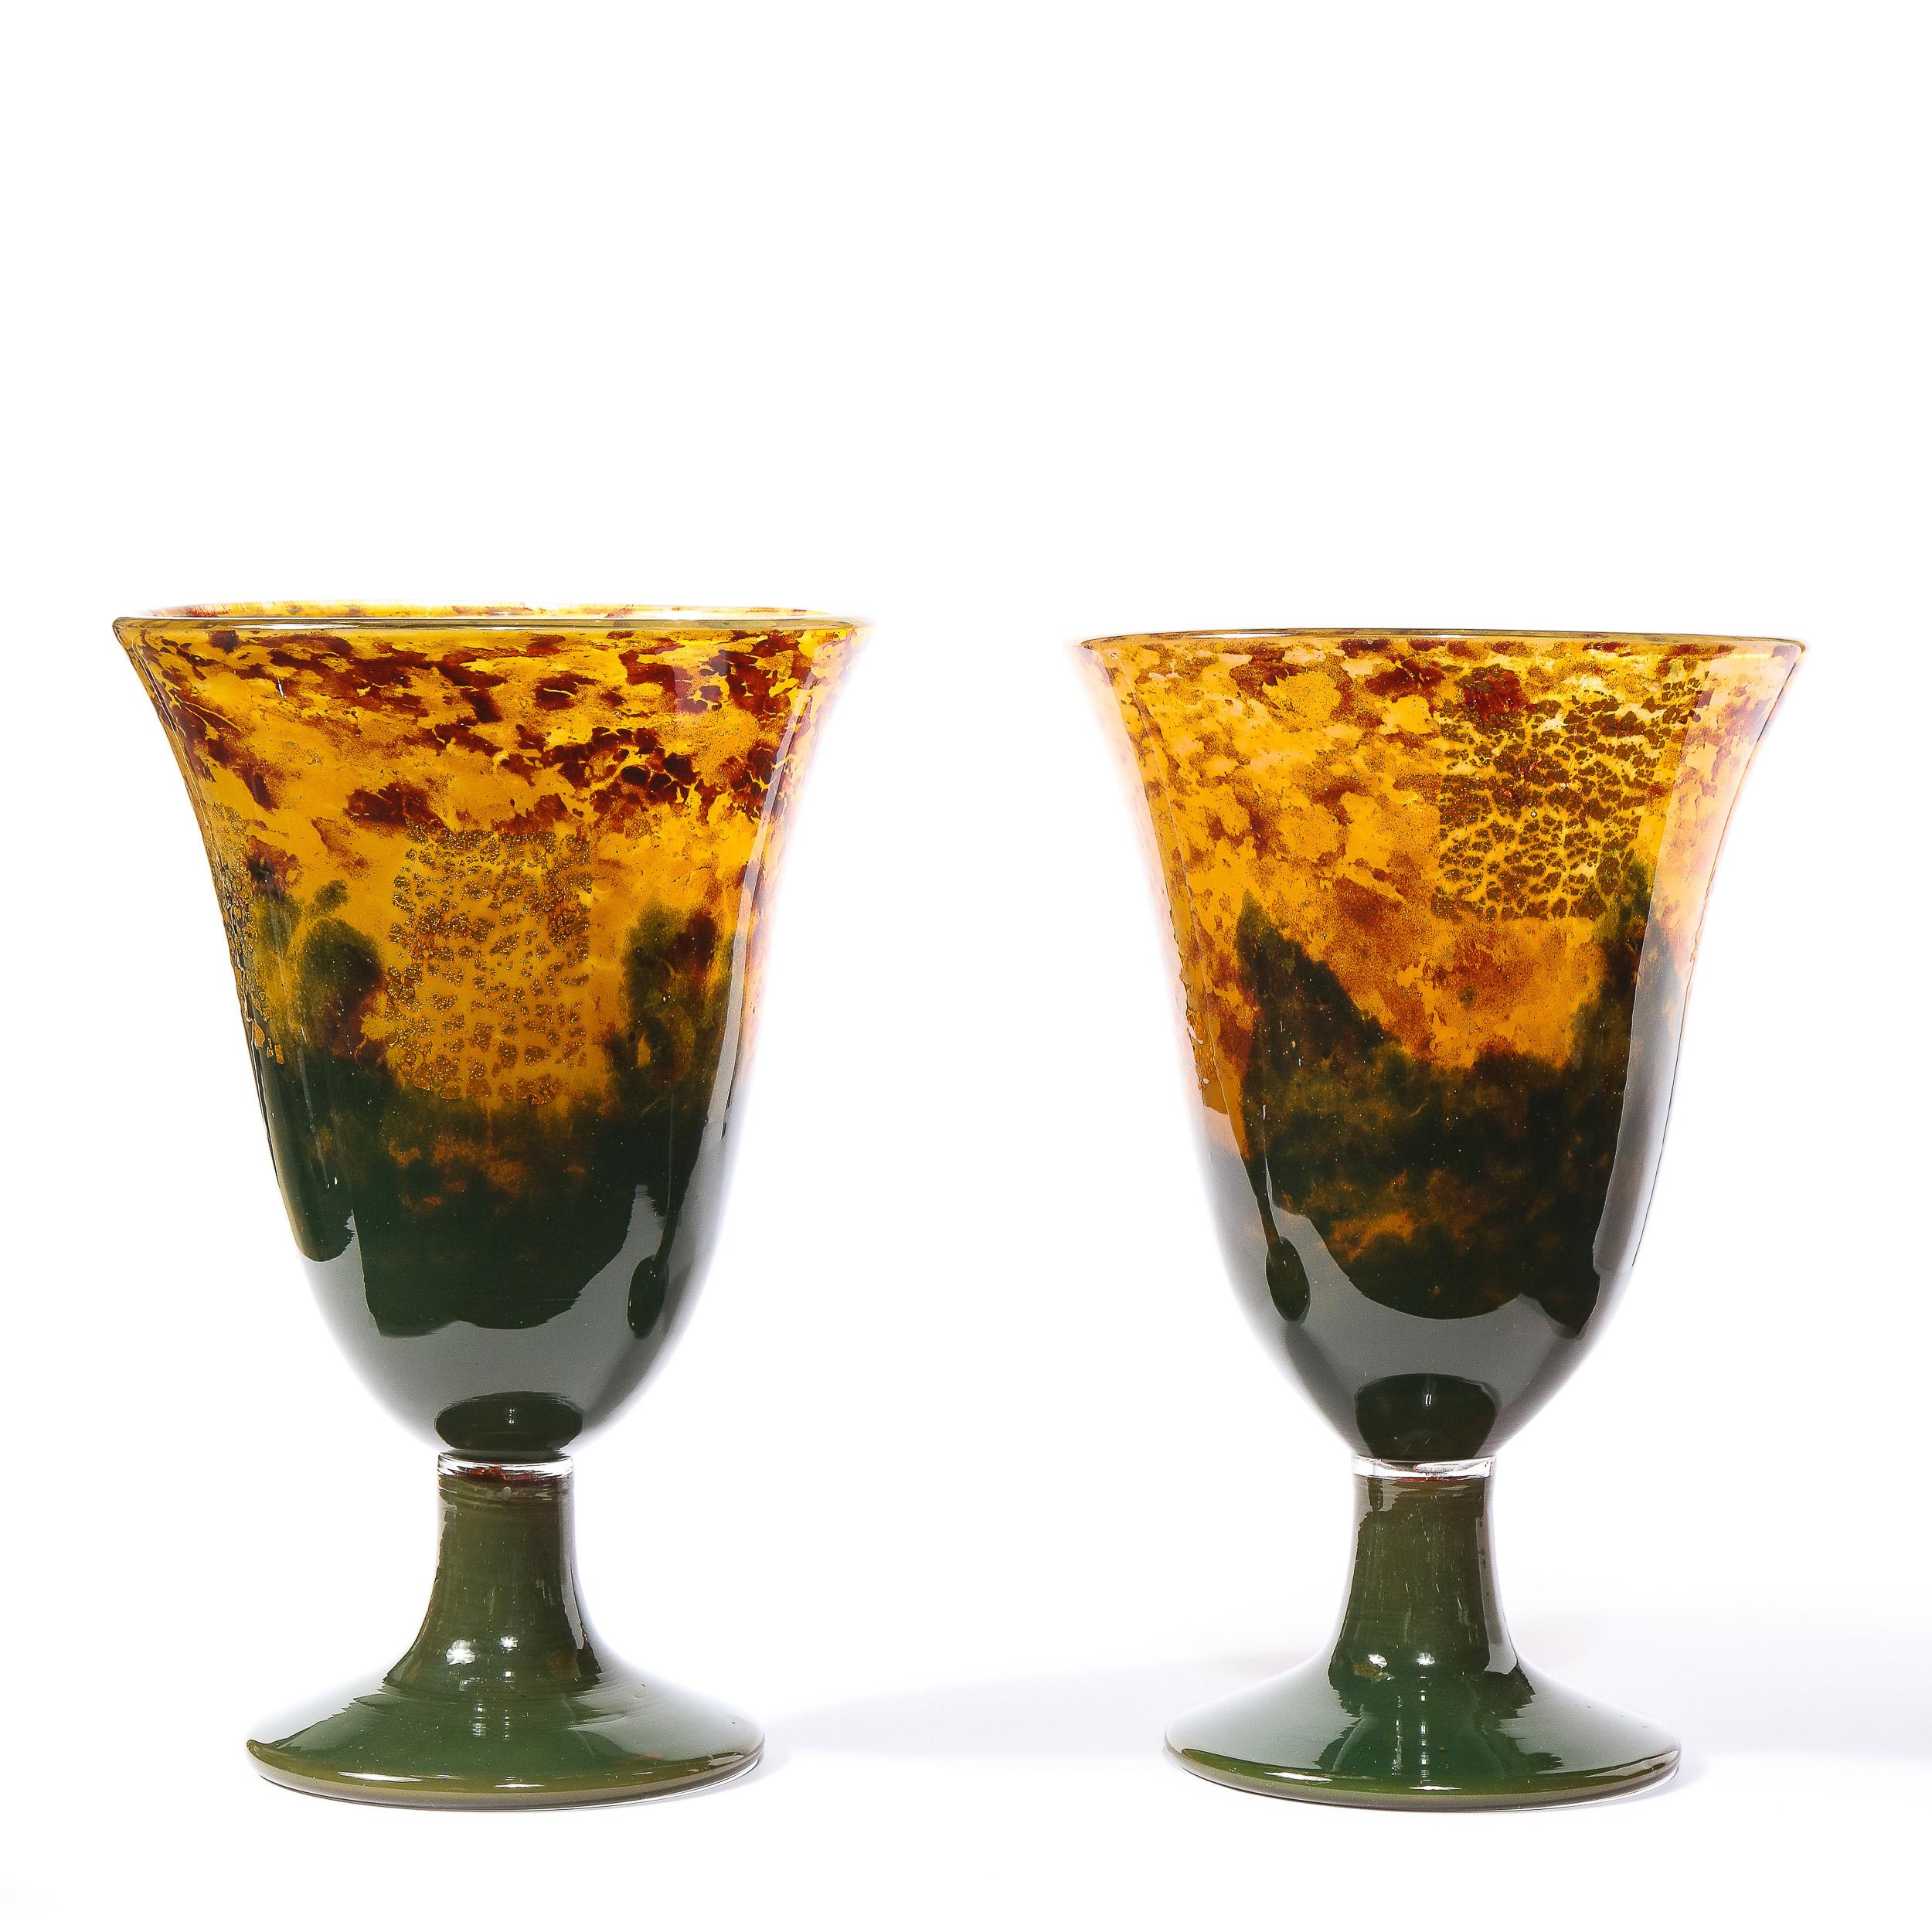 This refined pair of Art Deco vases were realized and signed Nancy Daum in France circa 1920. They offer billowing conical bodies in hand blown mottled glass with hues of saffron, emerald and ruby throughout. With their sumptuous glass quality and